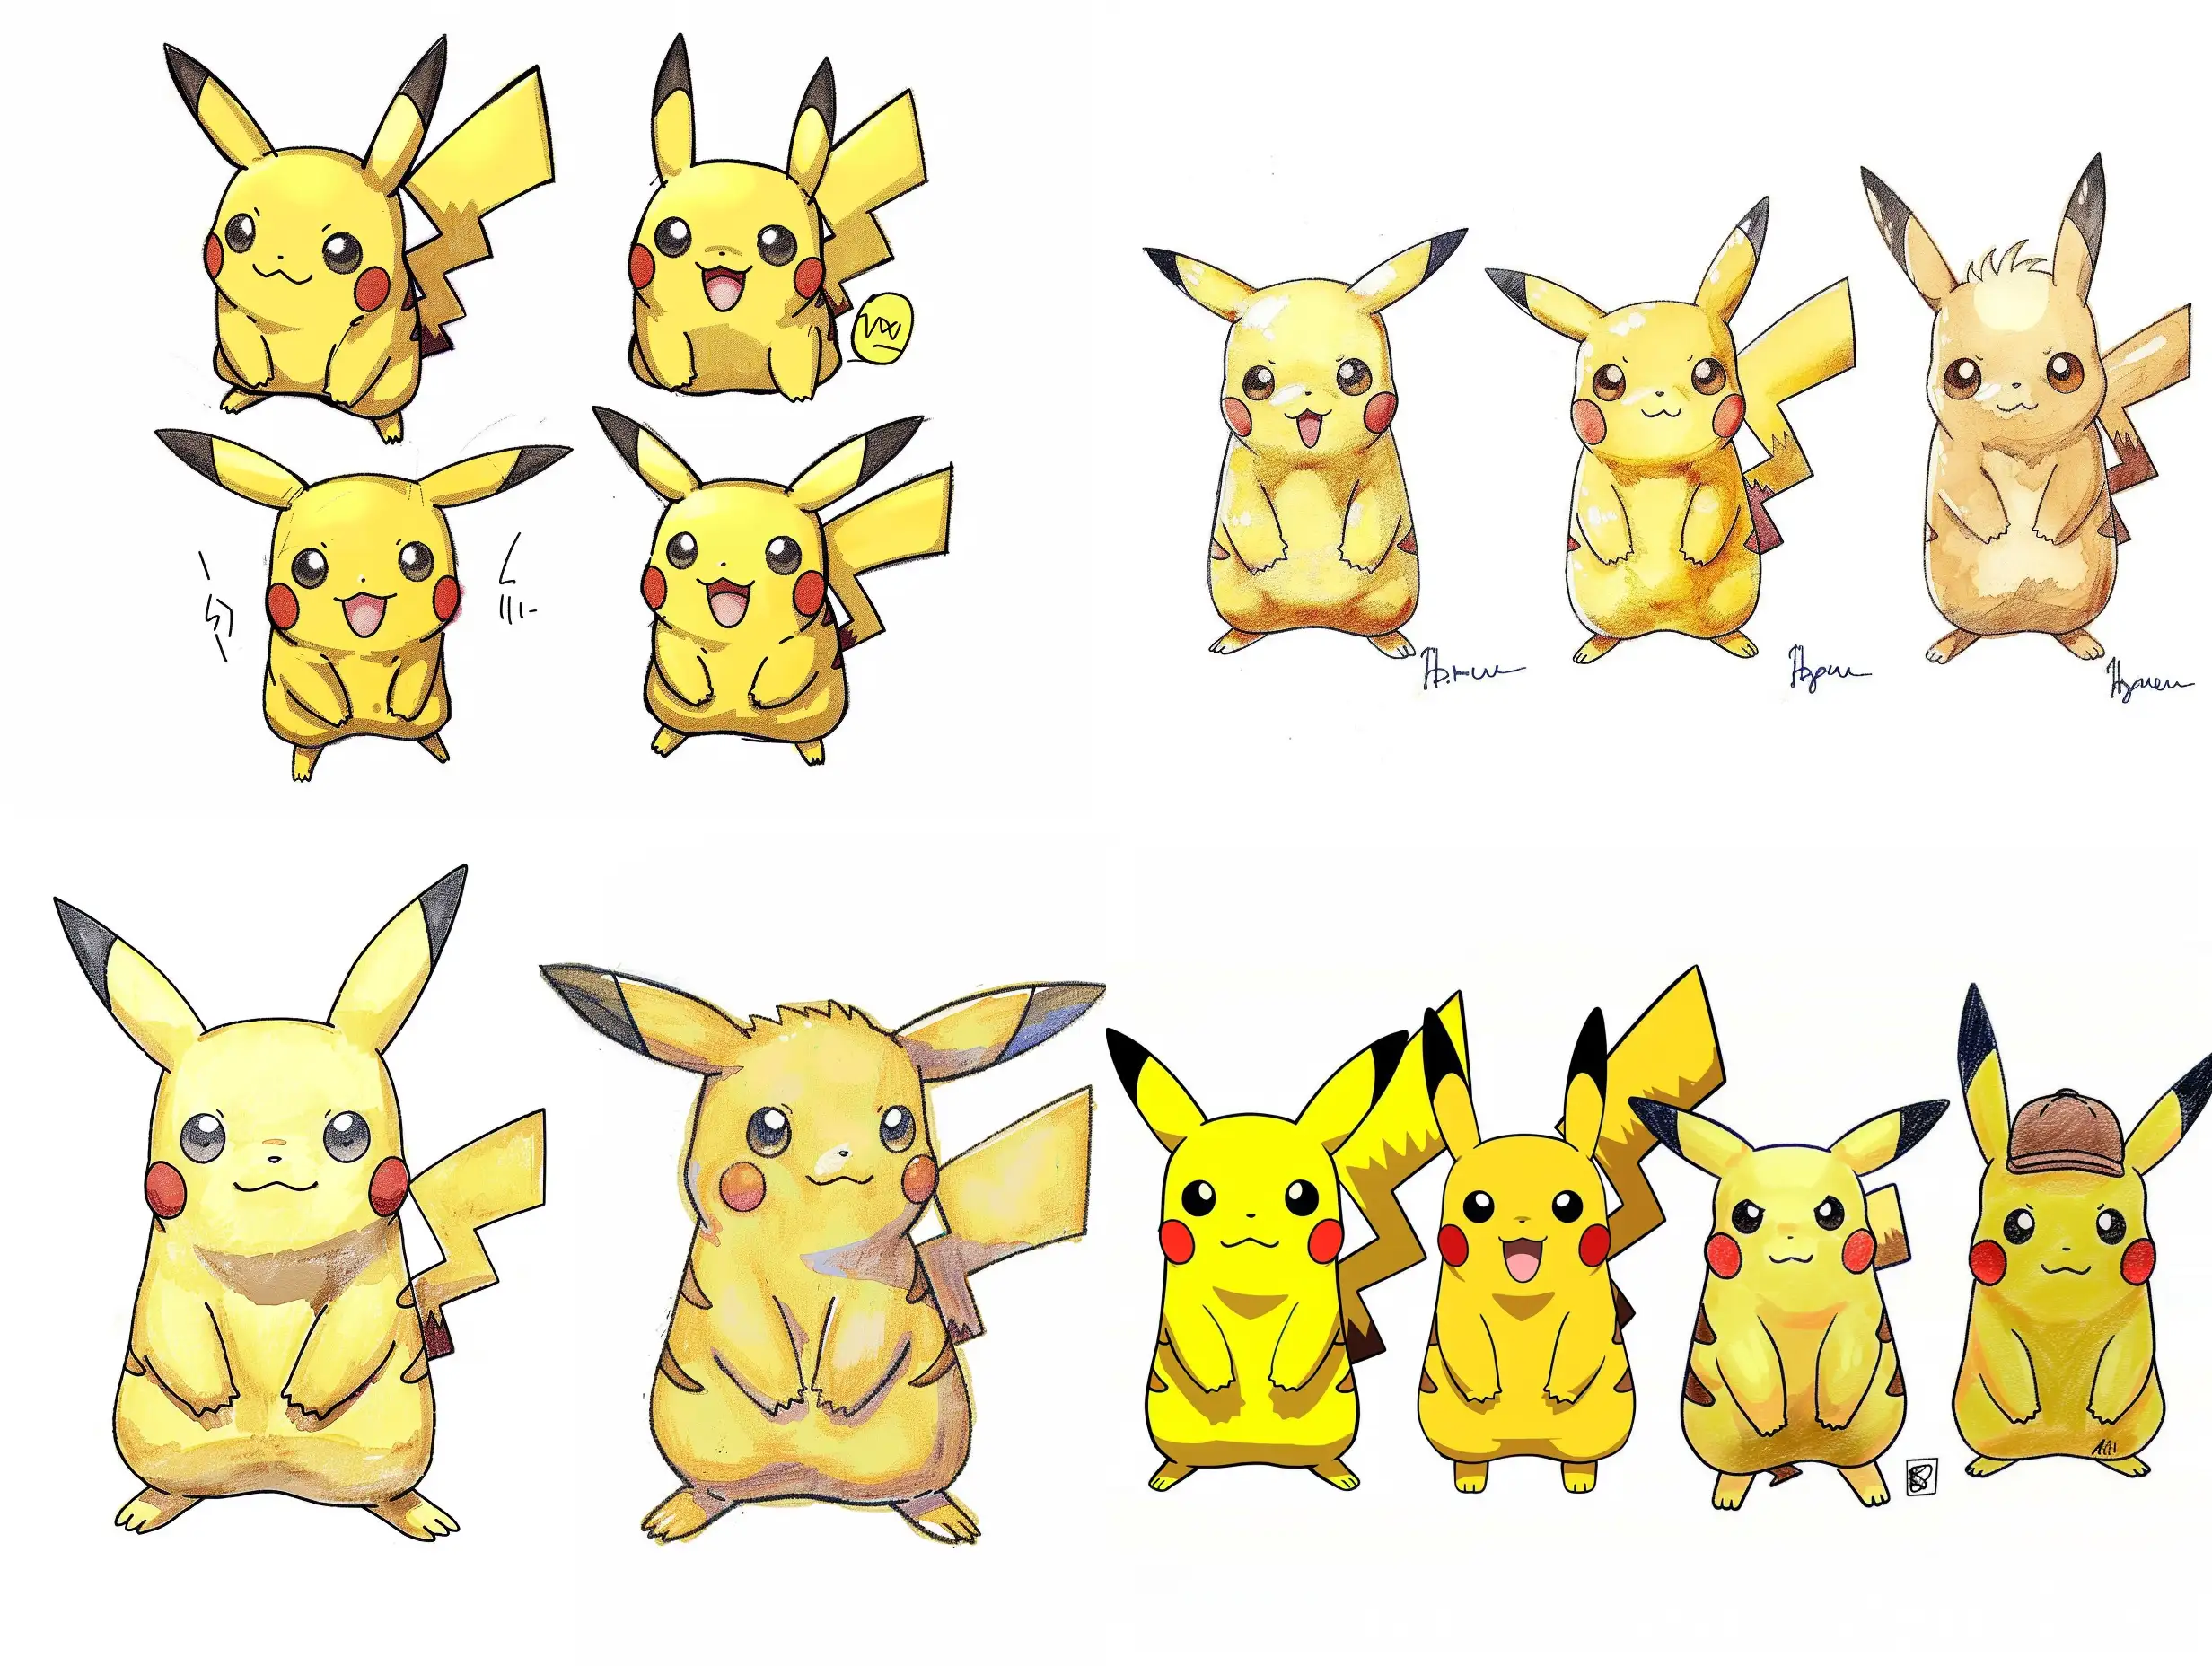 Drawing Pikachu But In 4 Styles